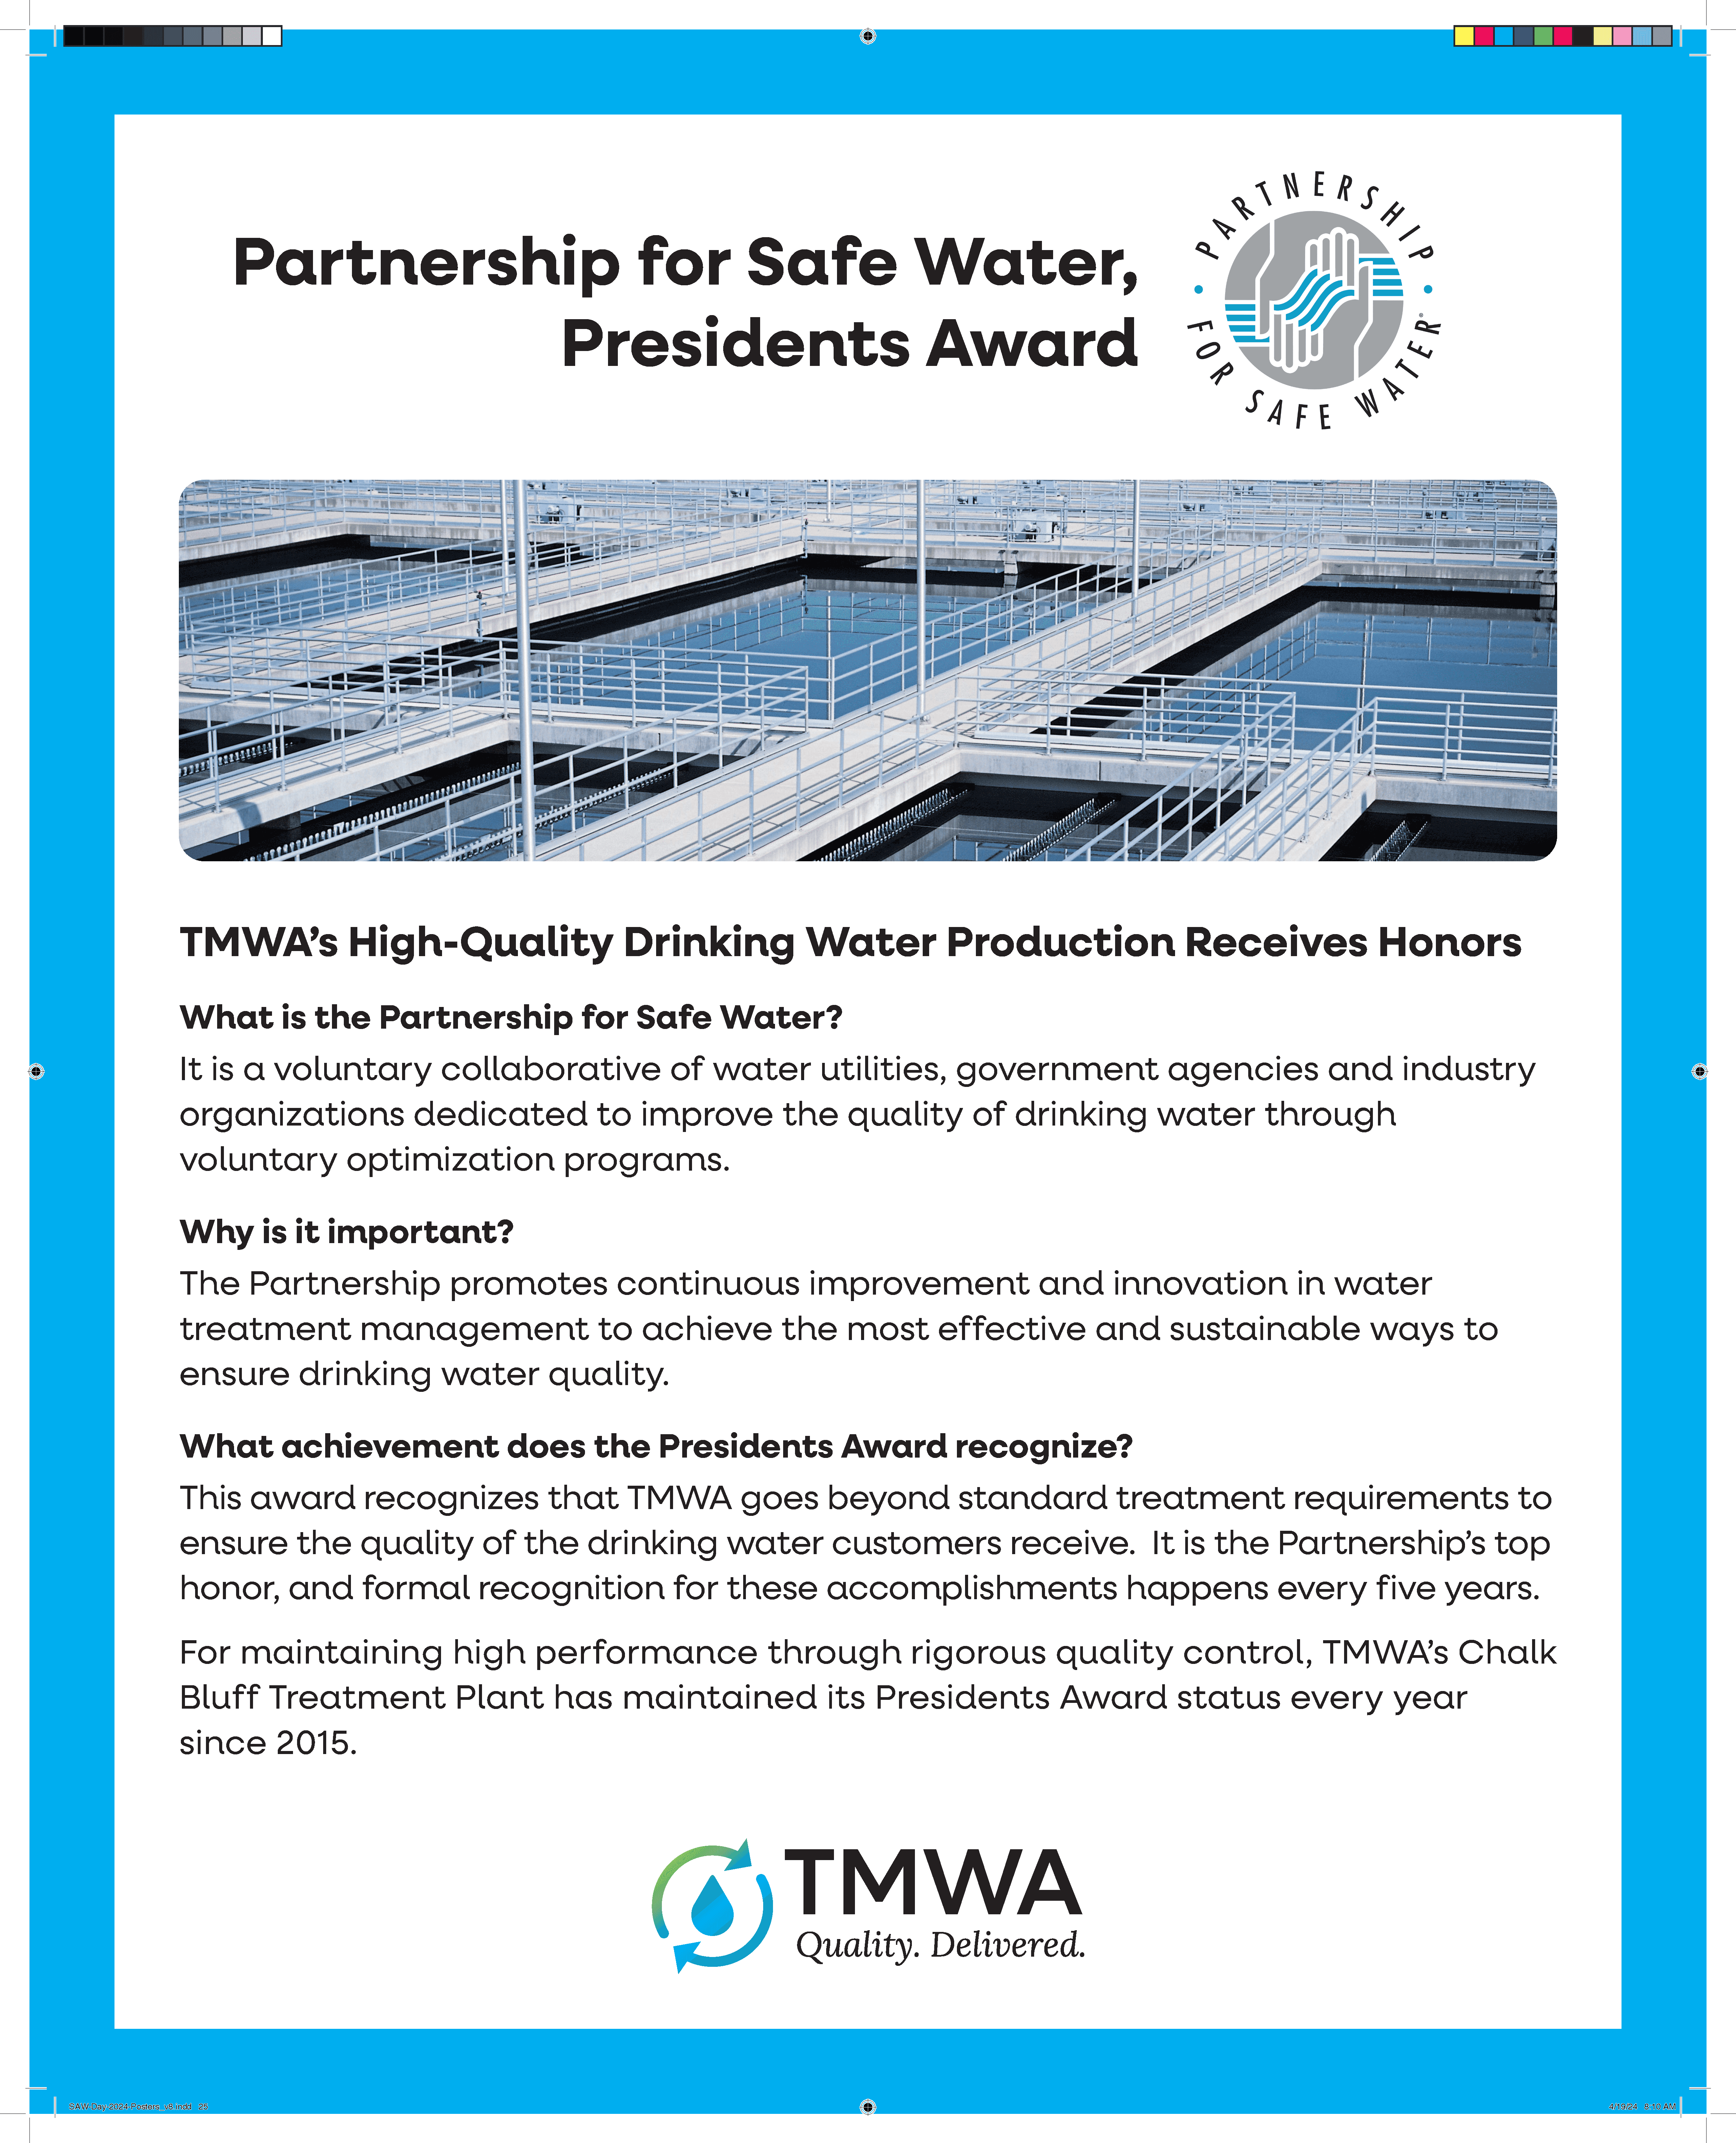 TMWA: Partnership for Safe Water Recognition Overview 